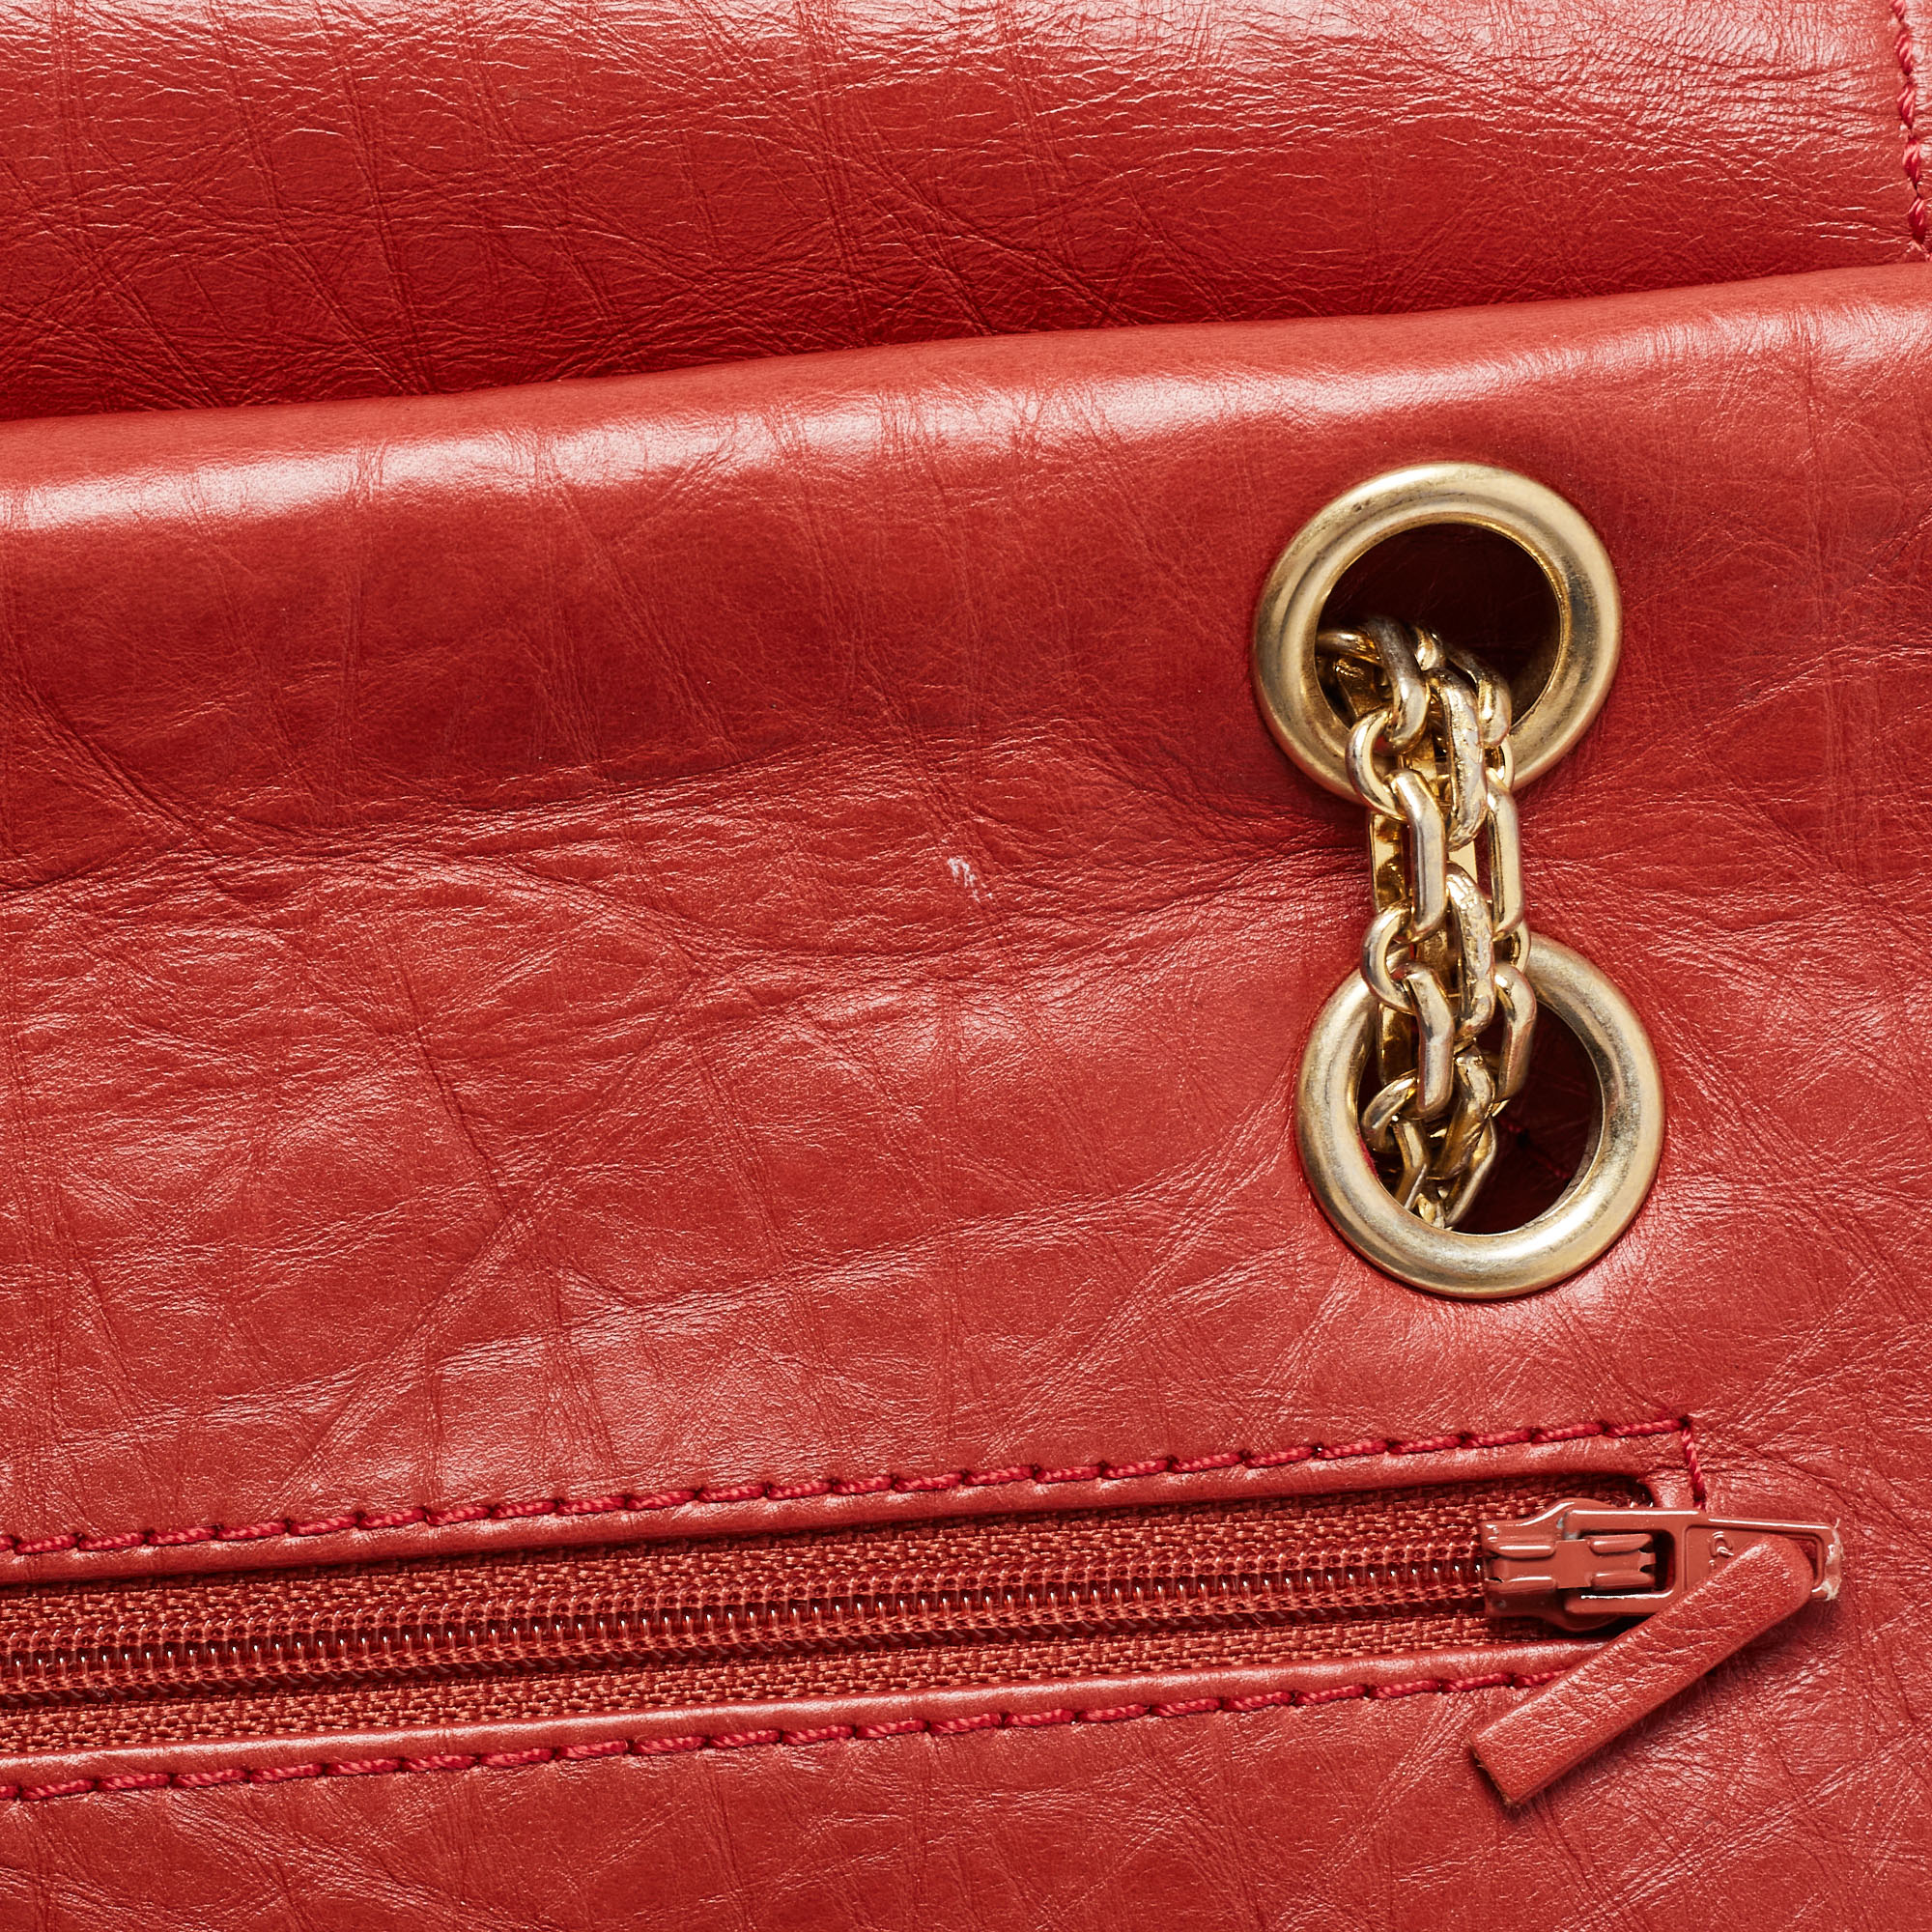 Chanel Red Quilted Aged Leather Reissue 2.55 Classic 227 Flap Bag